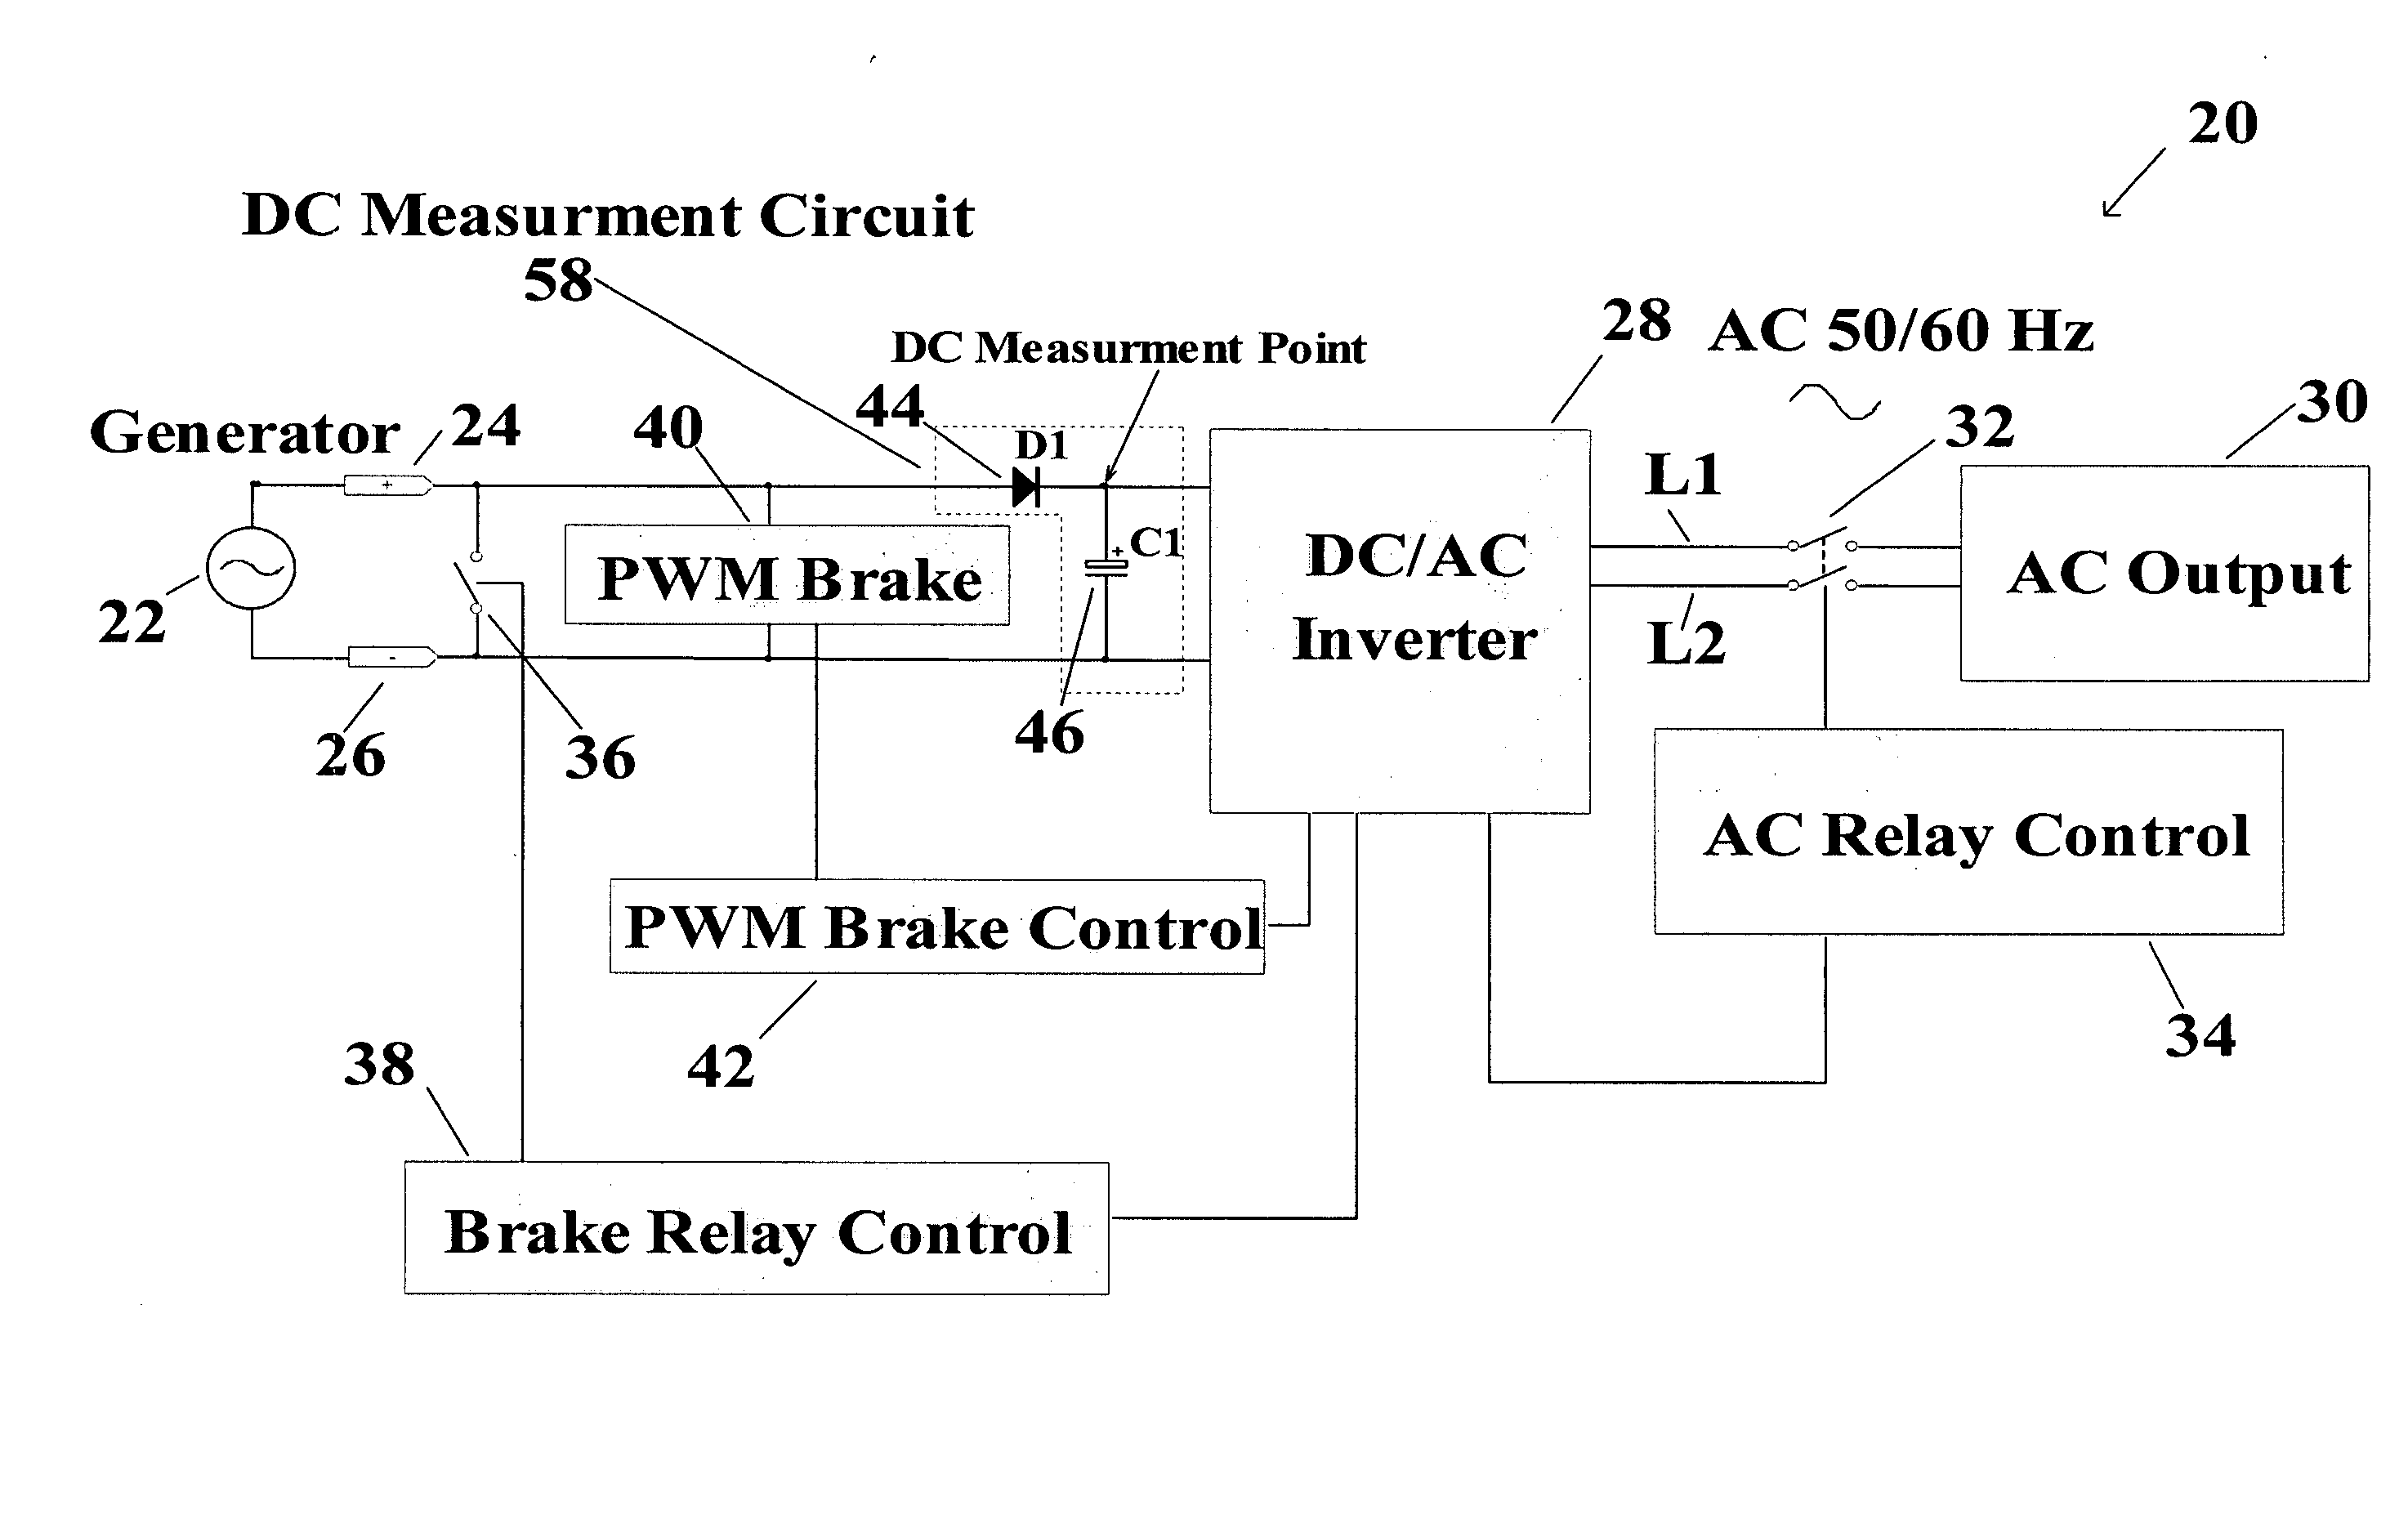 Over speed control circuit for a wind turbine generator which maximizes the power exported from the generator over time